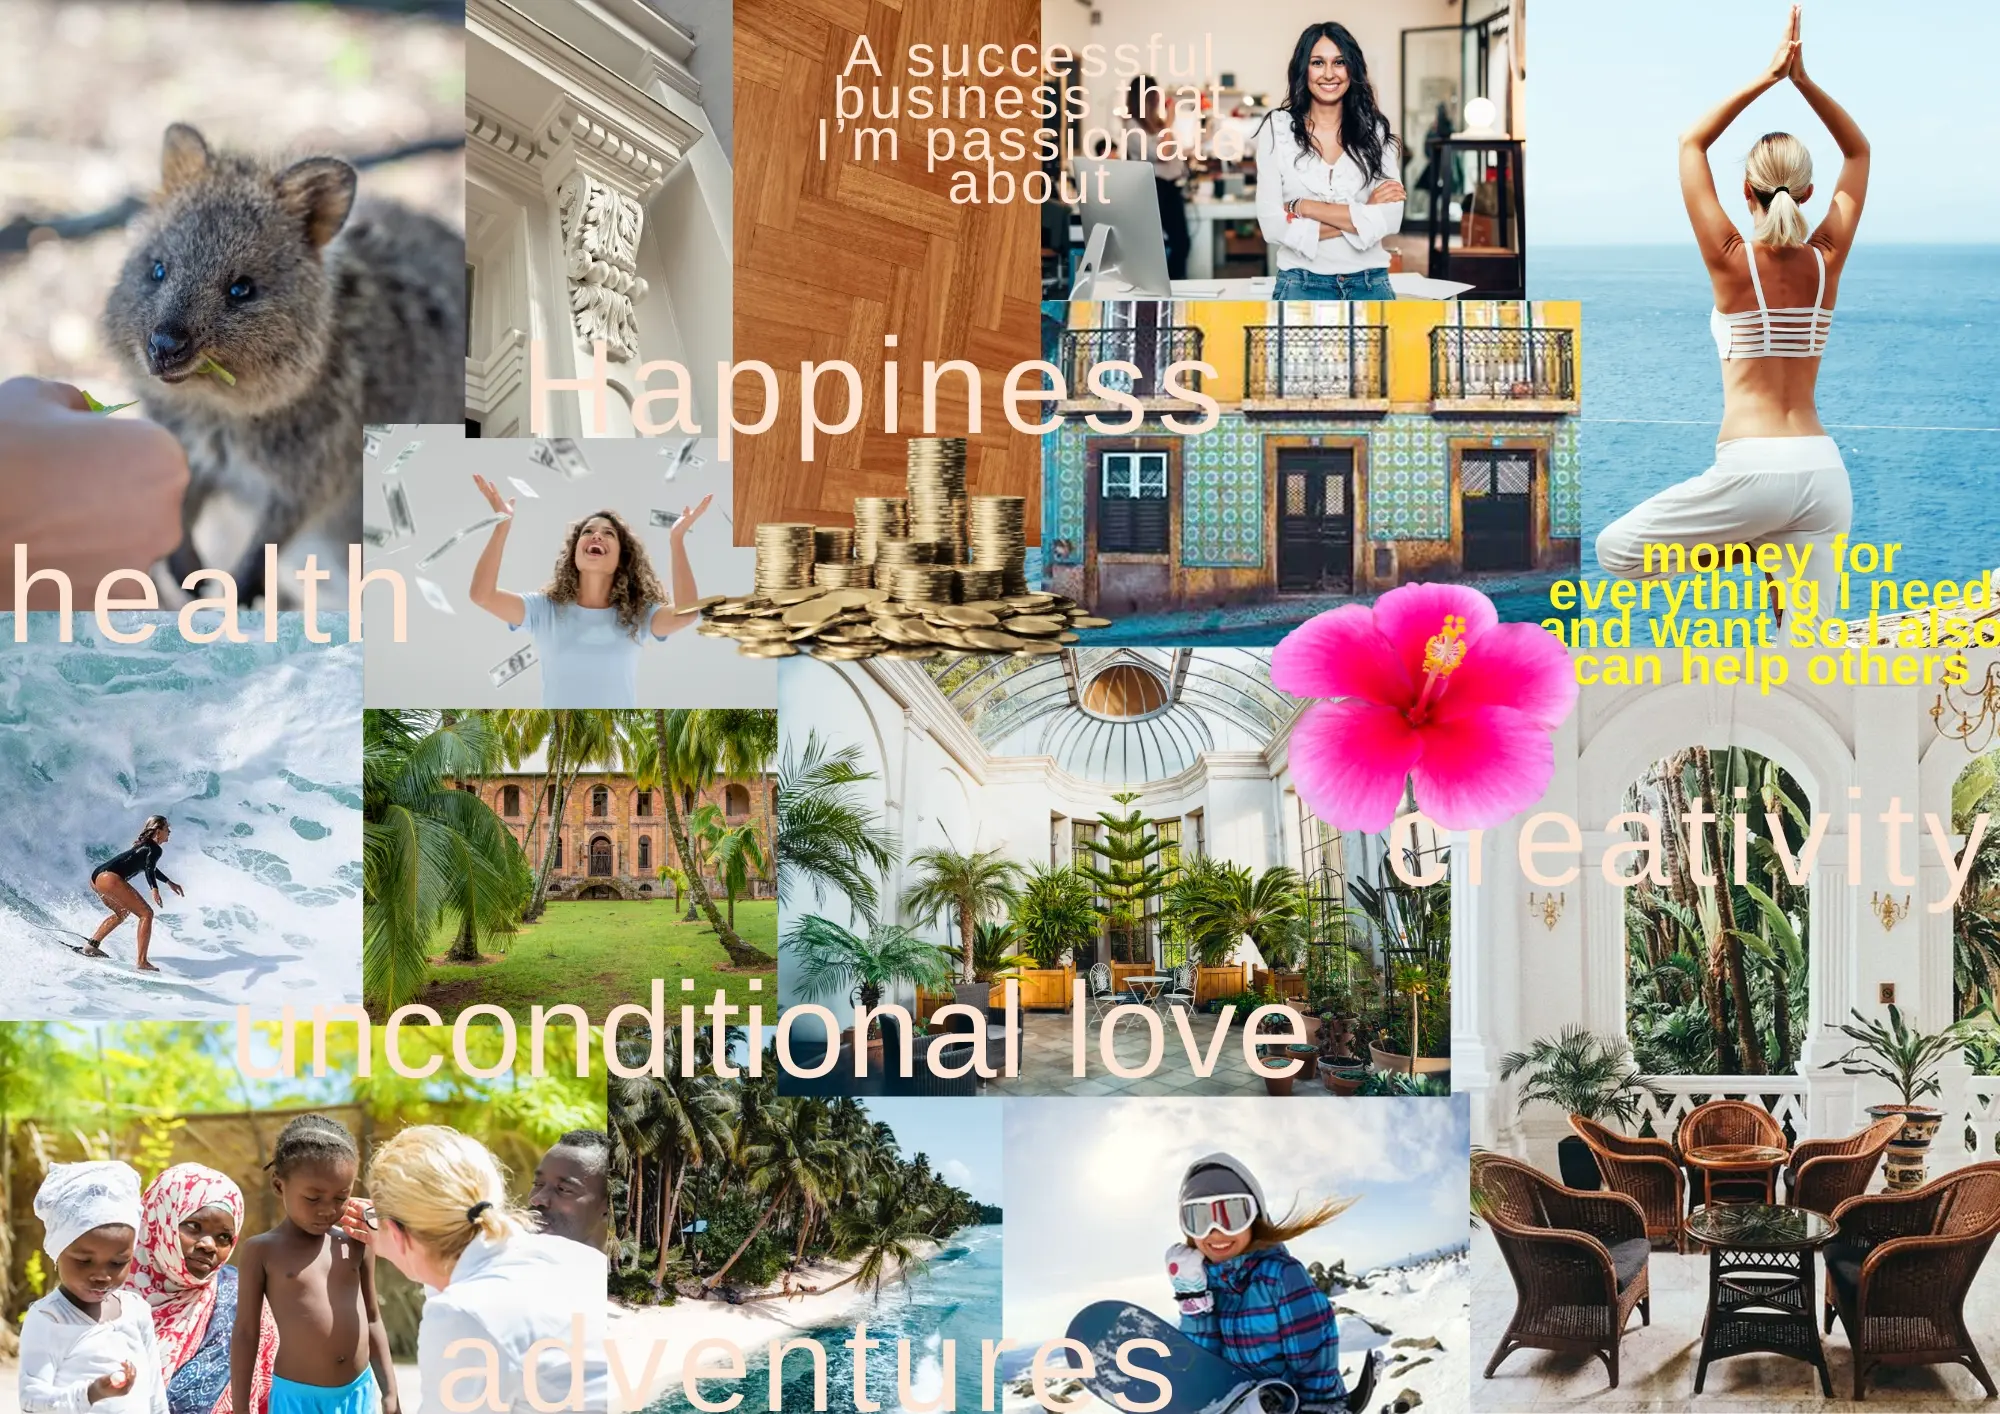 How to manifest your dream job - My vision board example